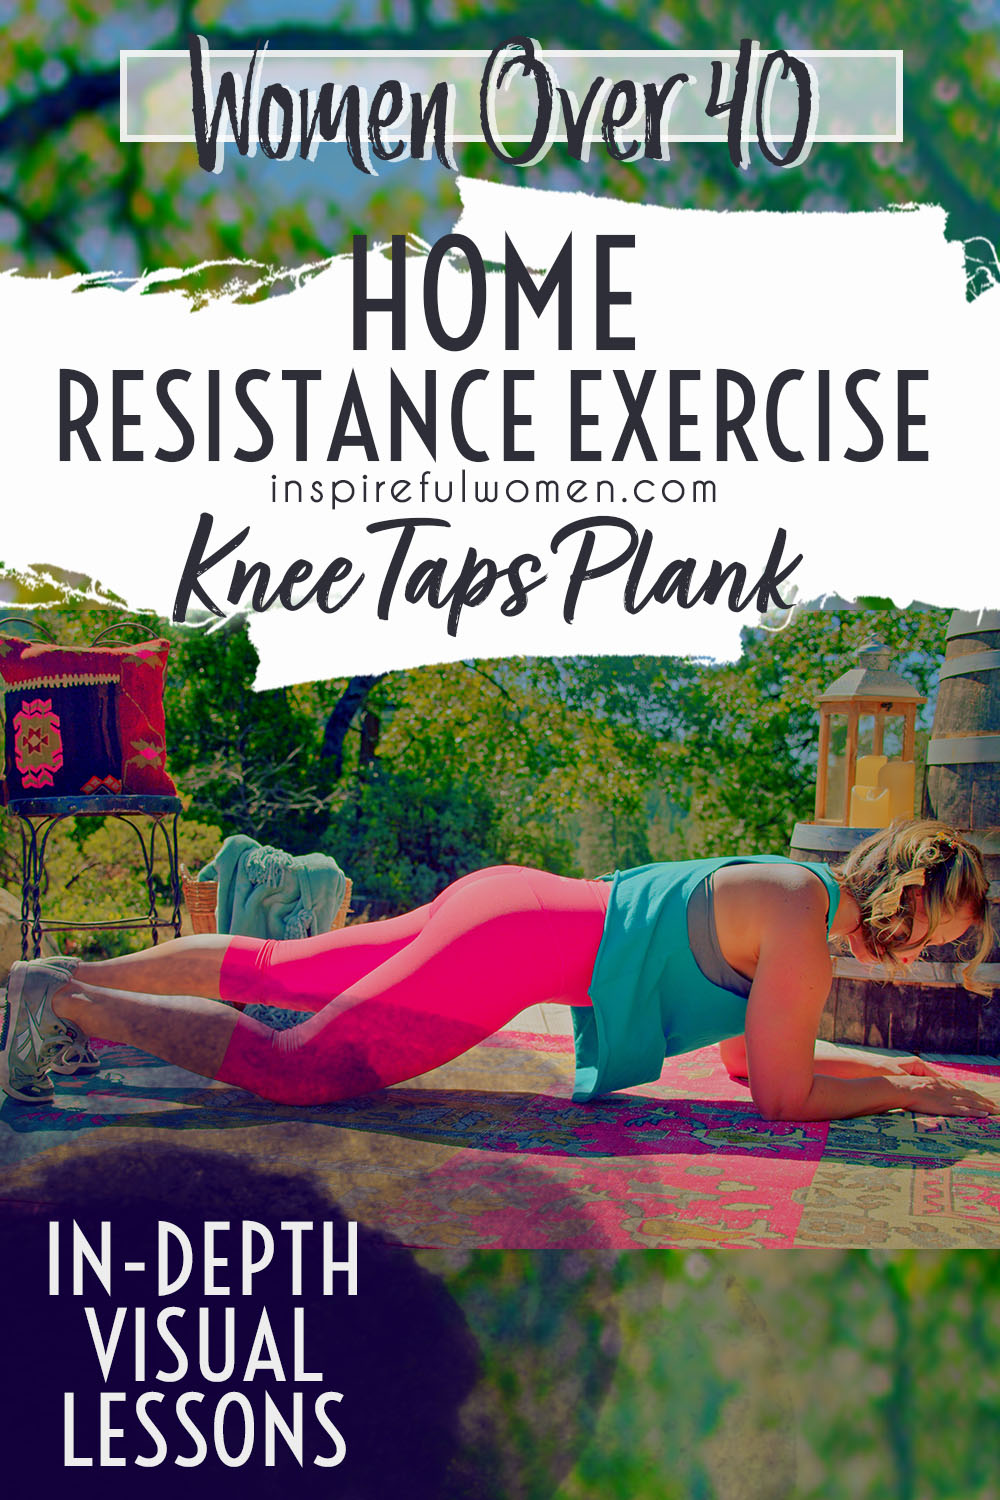 knee-taps-forearm-plank-variation-beginner-bodyweight-core-ab-exercise-at-home-women-40-plus